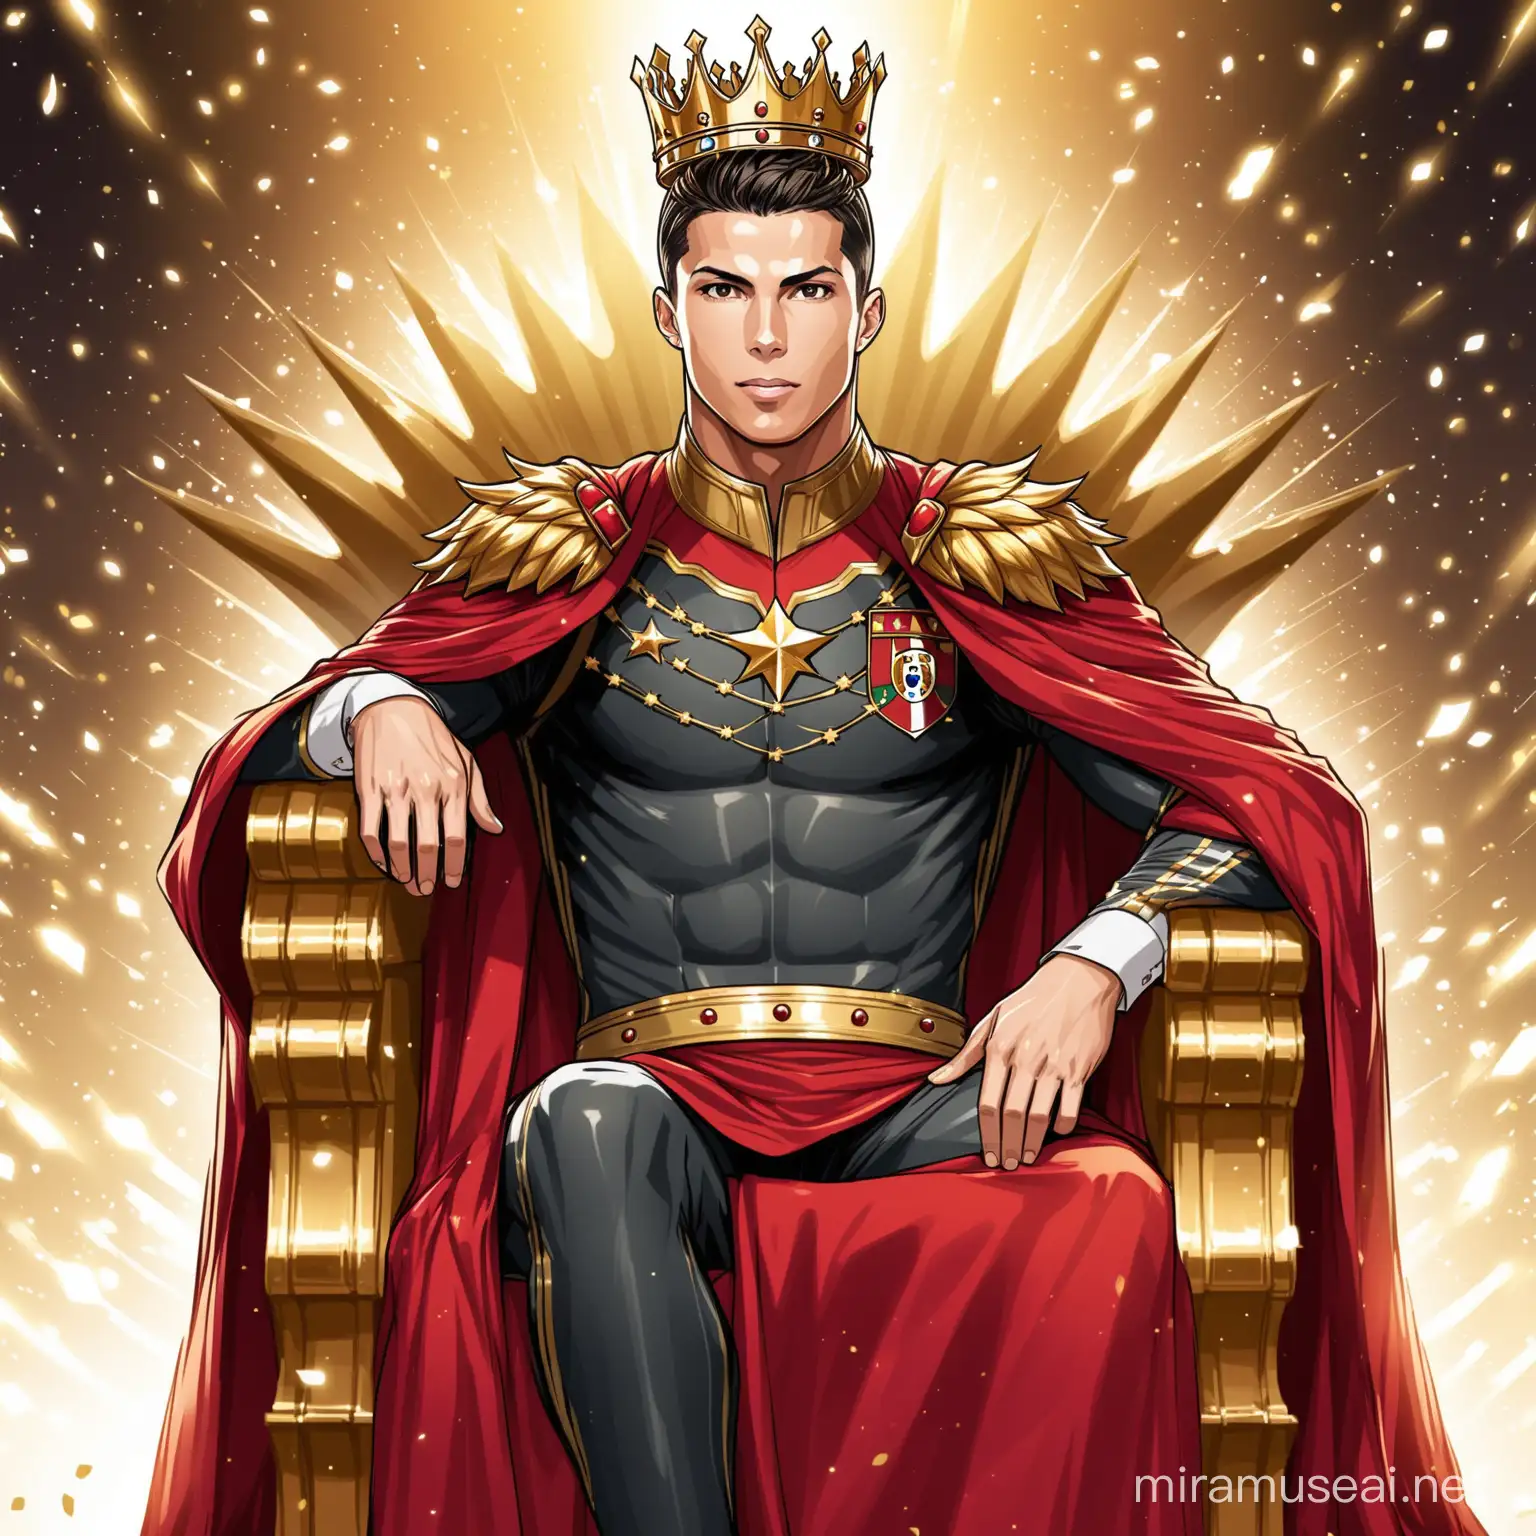 Cristiano Ronaldo Sitting on Royal Throne with Crown